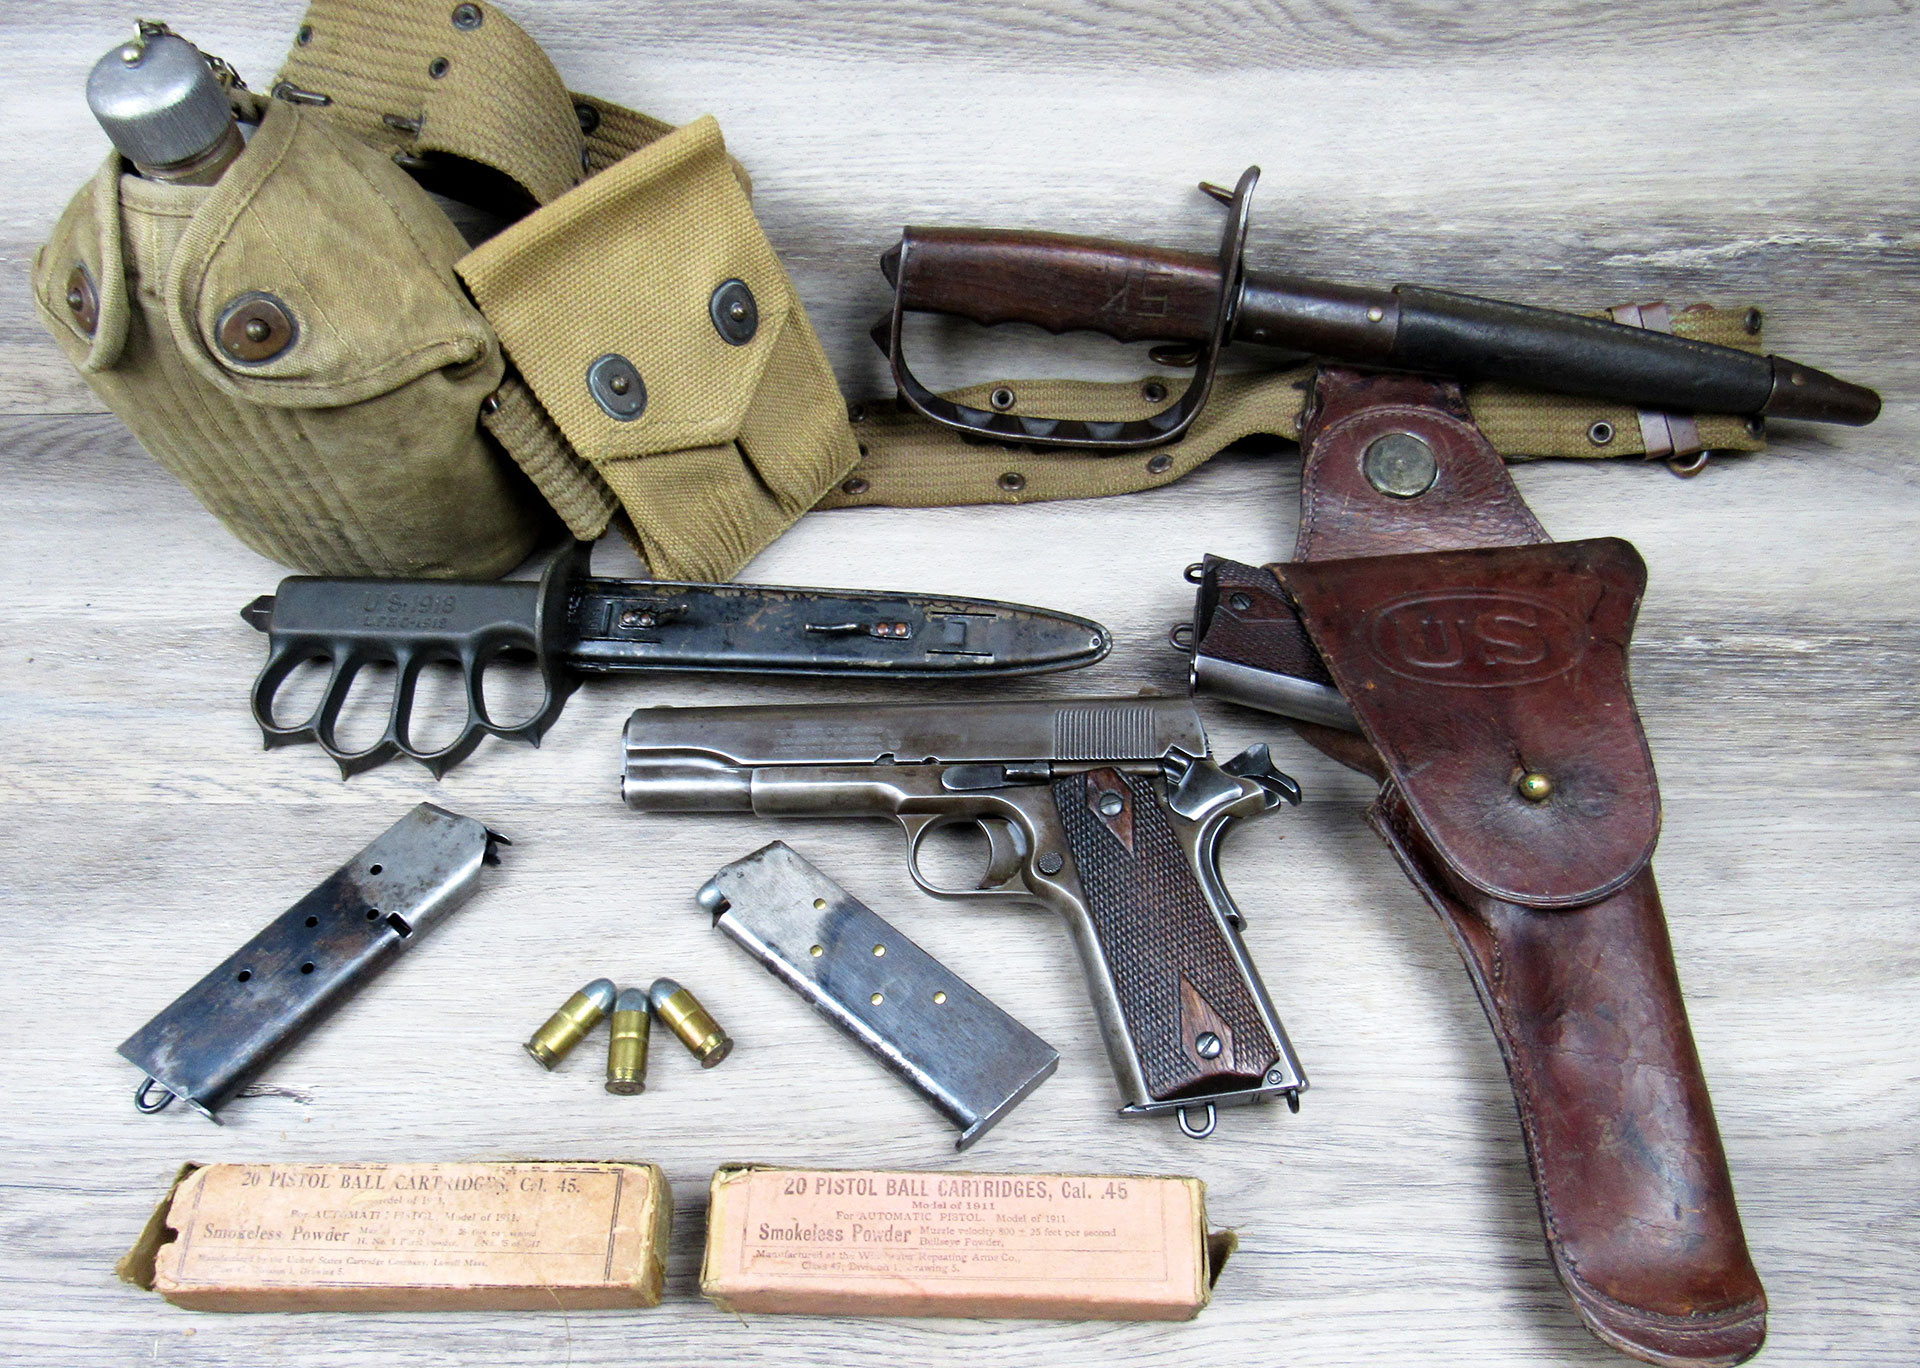 A World War I production M1911 pistol, with associated AEF gear and equipment from the period. Photo credit Mike Gruber Collection.